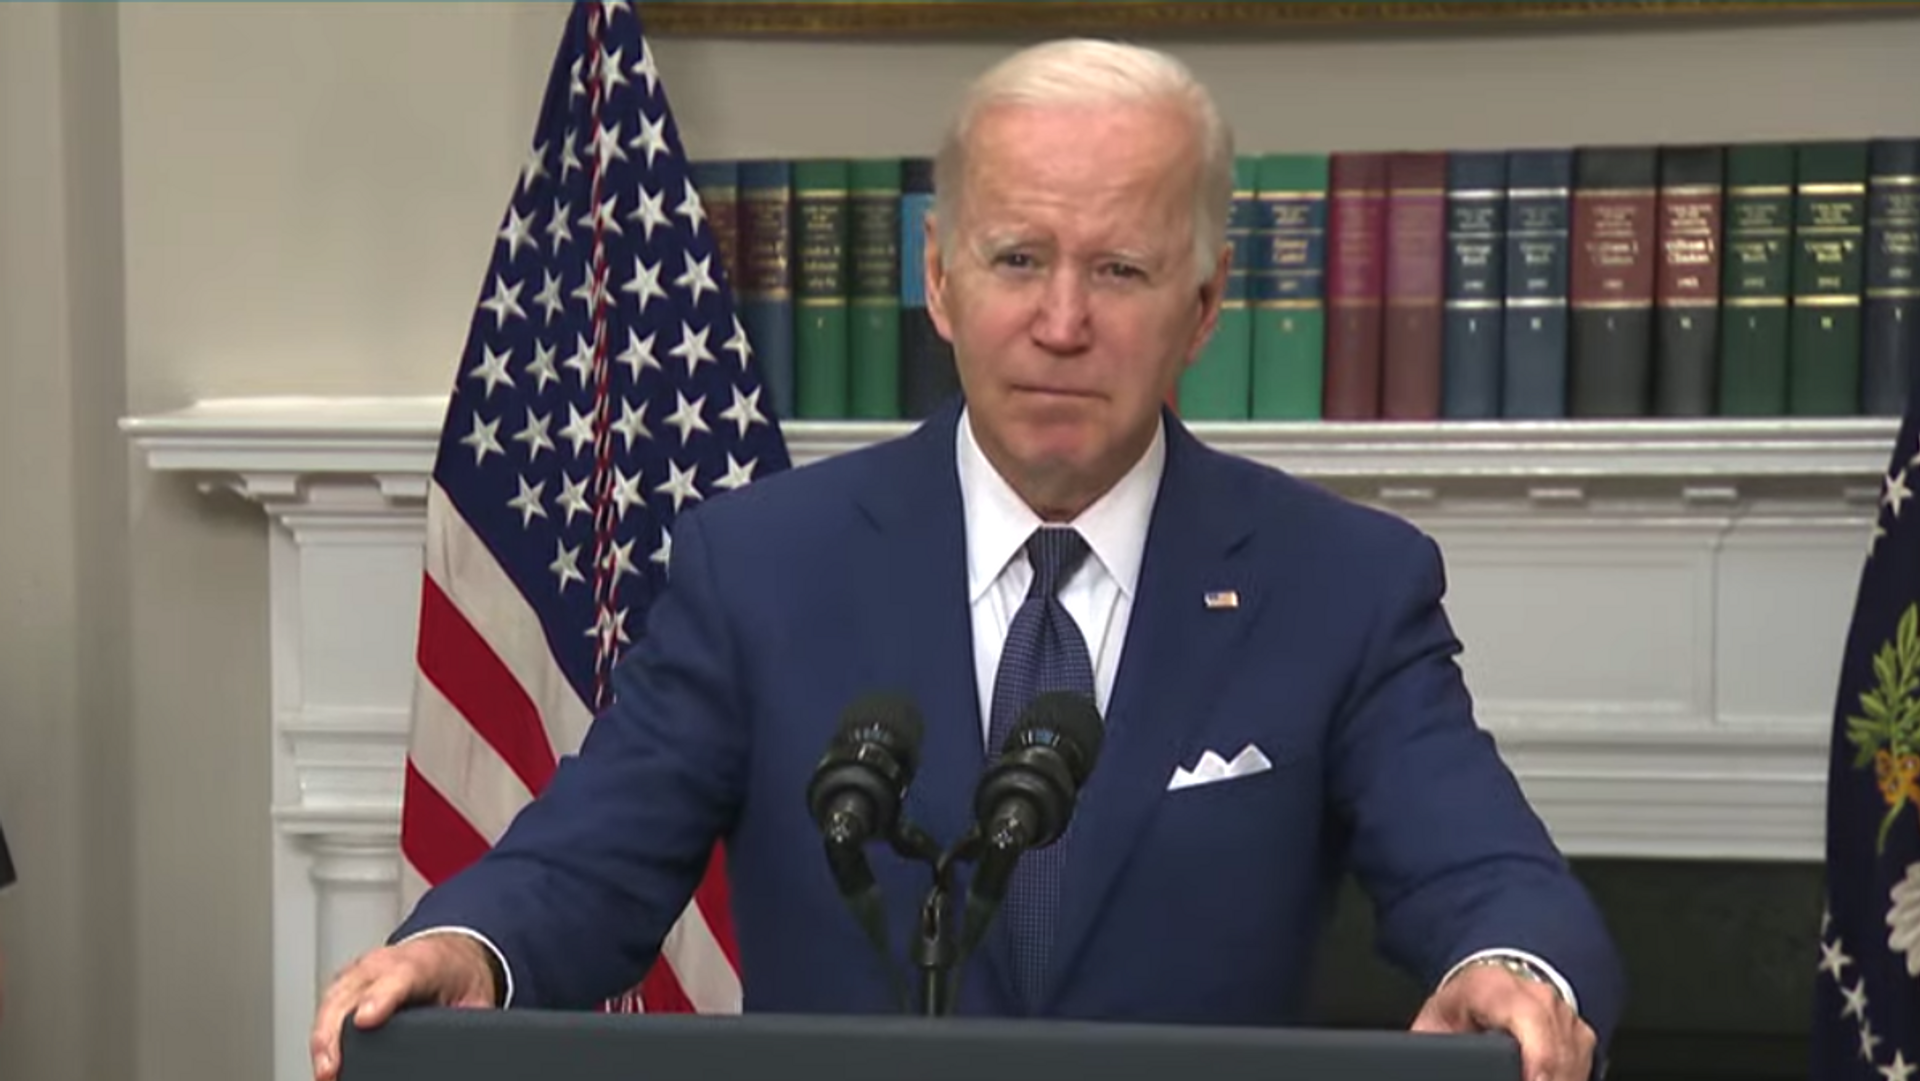 US President Joe Biden addresses the nation on May 24, 2022, after news that at least 18 children and one teacher was killed during a mass shooting at Robb Elementary School in Uvalde, Texas. - Sputnik International, 1920, 15.06.2022